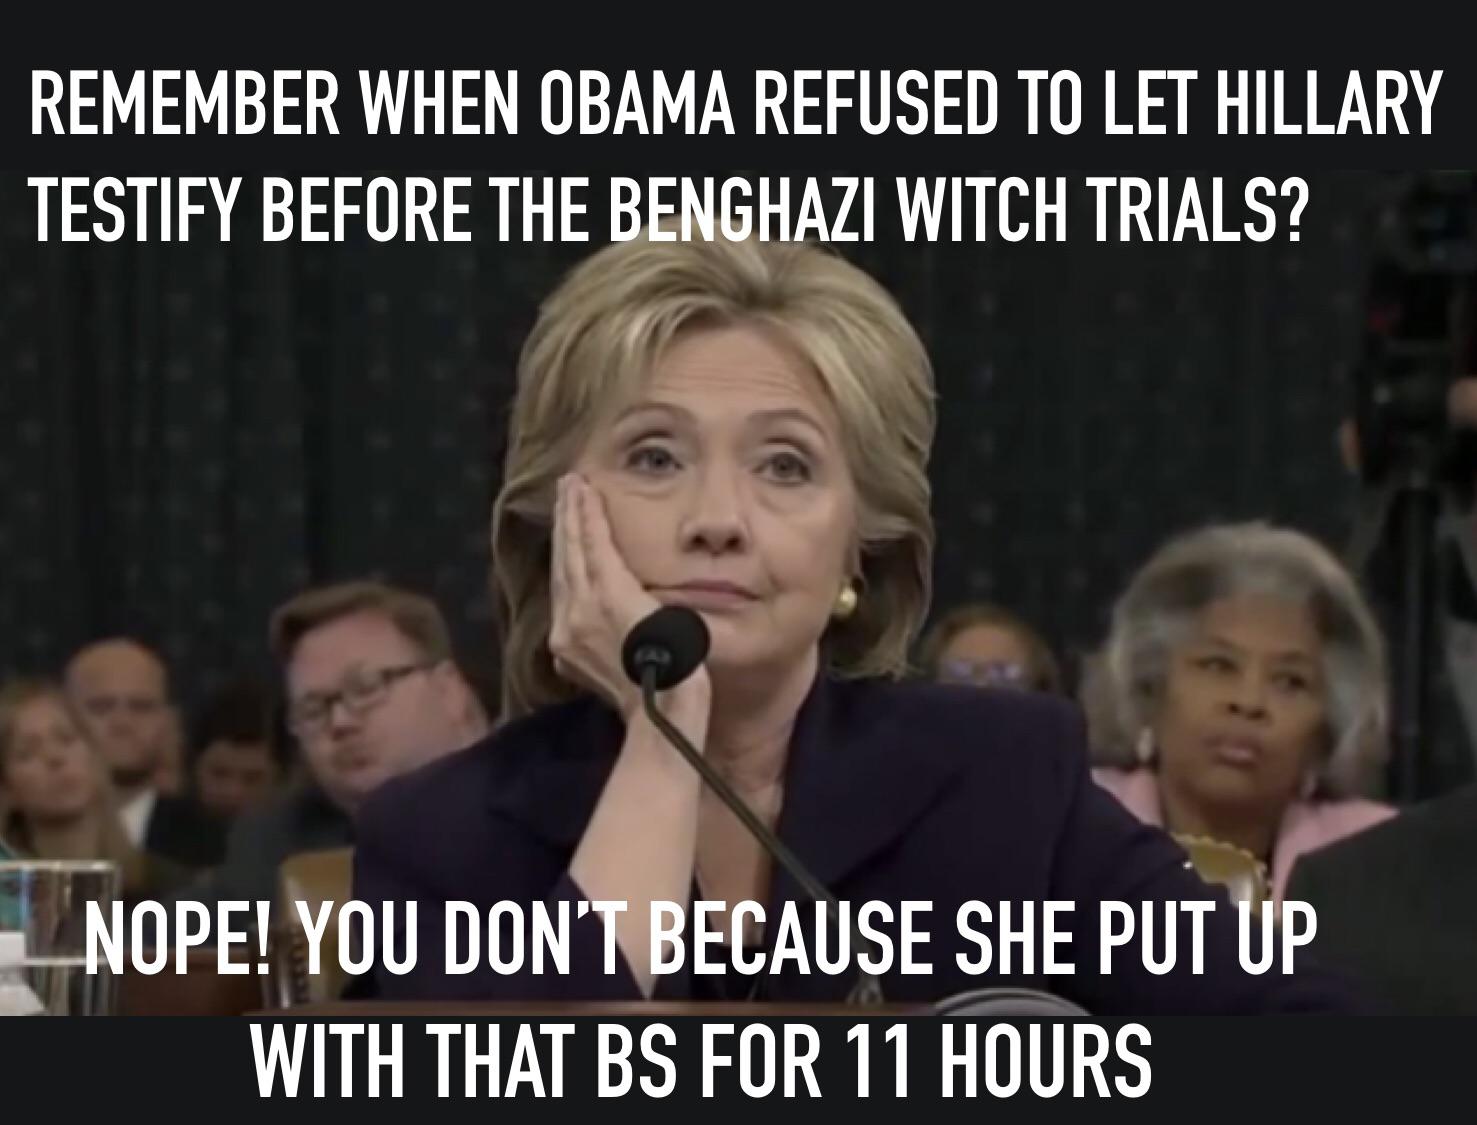 political political-memes political text: REMEMBER WHEN OBAMA REFUSED TO LET HILLARY TESTIFY BEFORE THE BENGHAZI WITCH TRIALS? *NOPE! YOU DON' ßECAUSE SHE PUTIJP WITH THAT BS FOR Il HOURS 